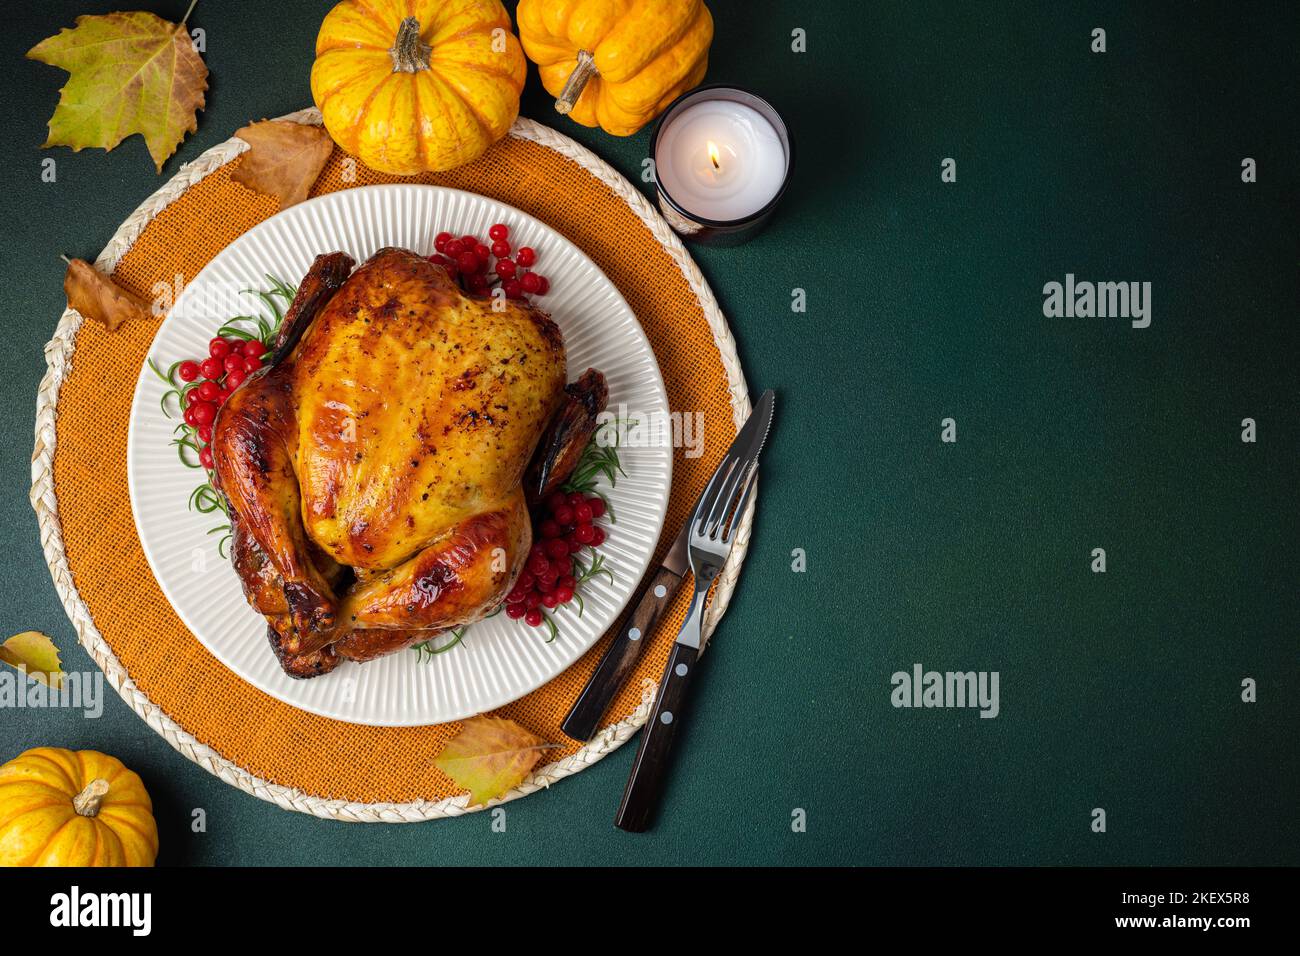 Roasted whole chicken or turkey with autumn vegetables for thanksgiving dinner on green background. Happy Thanksgiving background. Copy space Stock Photo